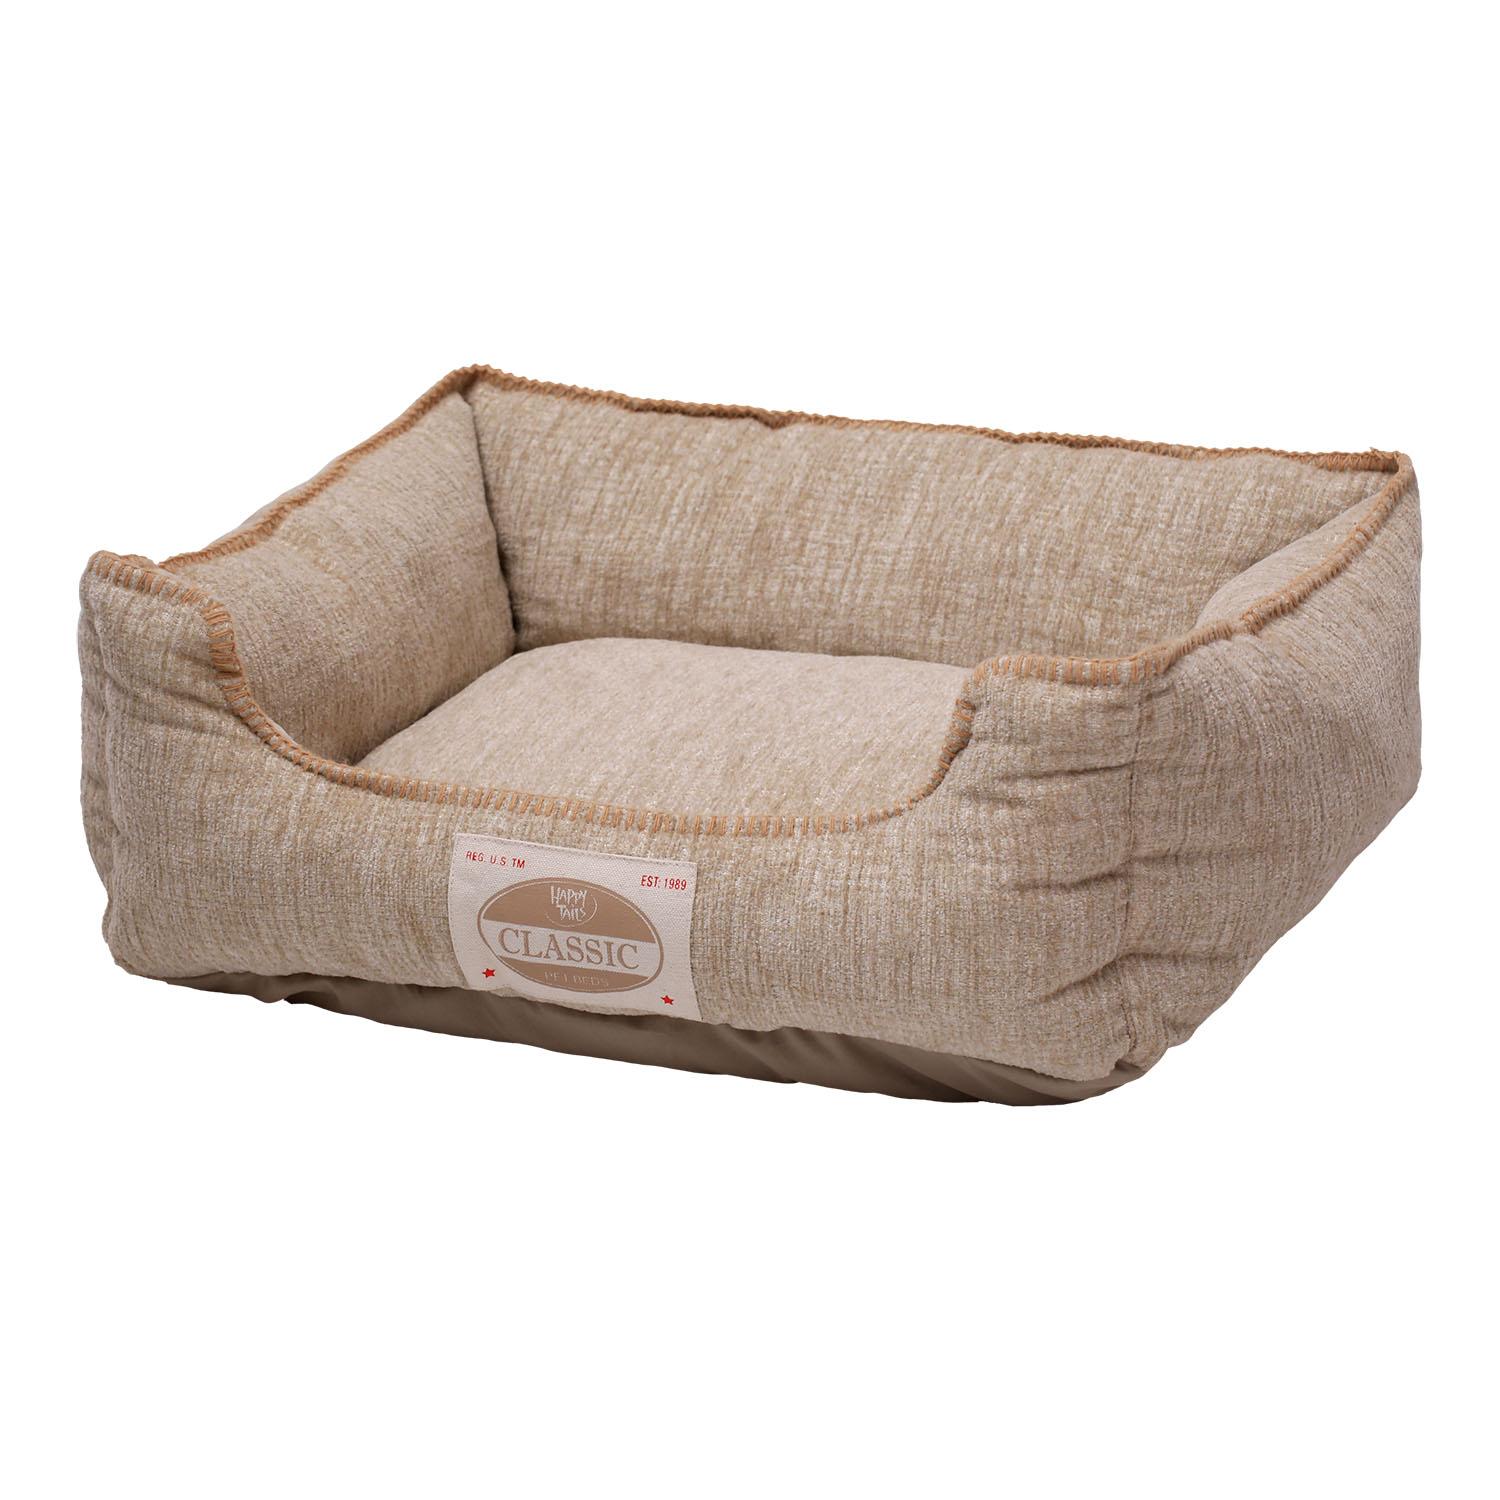 https://images.baxterboo.com/global/images/products/large/happy-tails-chenille-cuddler-classic-dog-bed-sand-3217.jpg